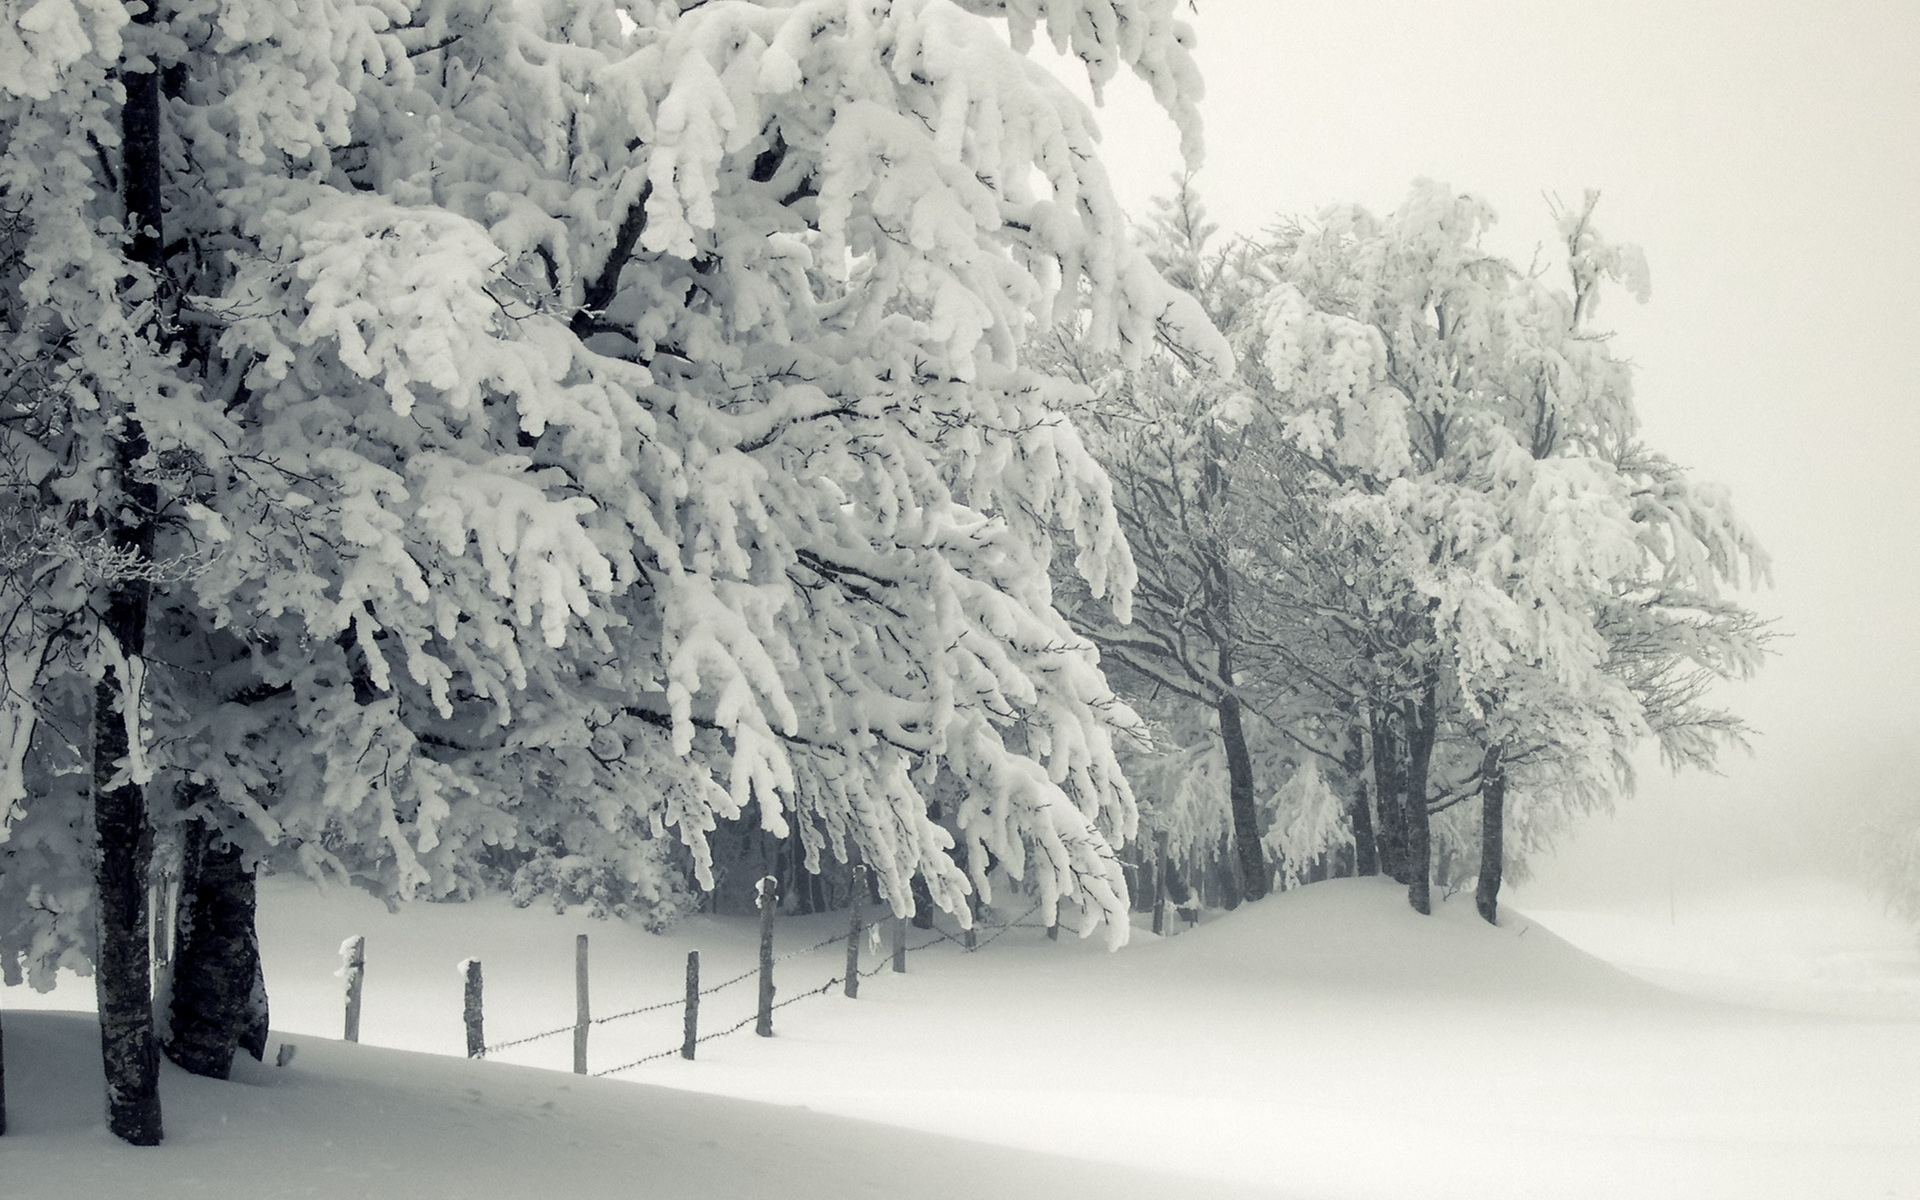 nature, Landscapes, Winter, Snow, Seasons, Cold, Freezing, White, Trees, Fields, Fence, Storm Wallpaper